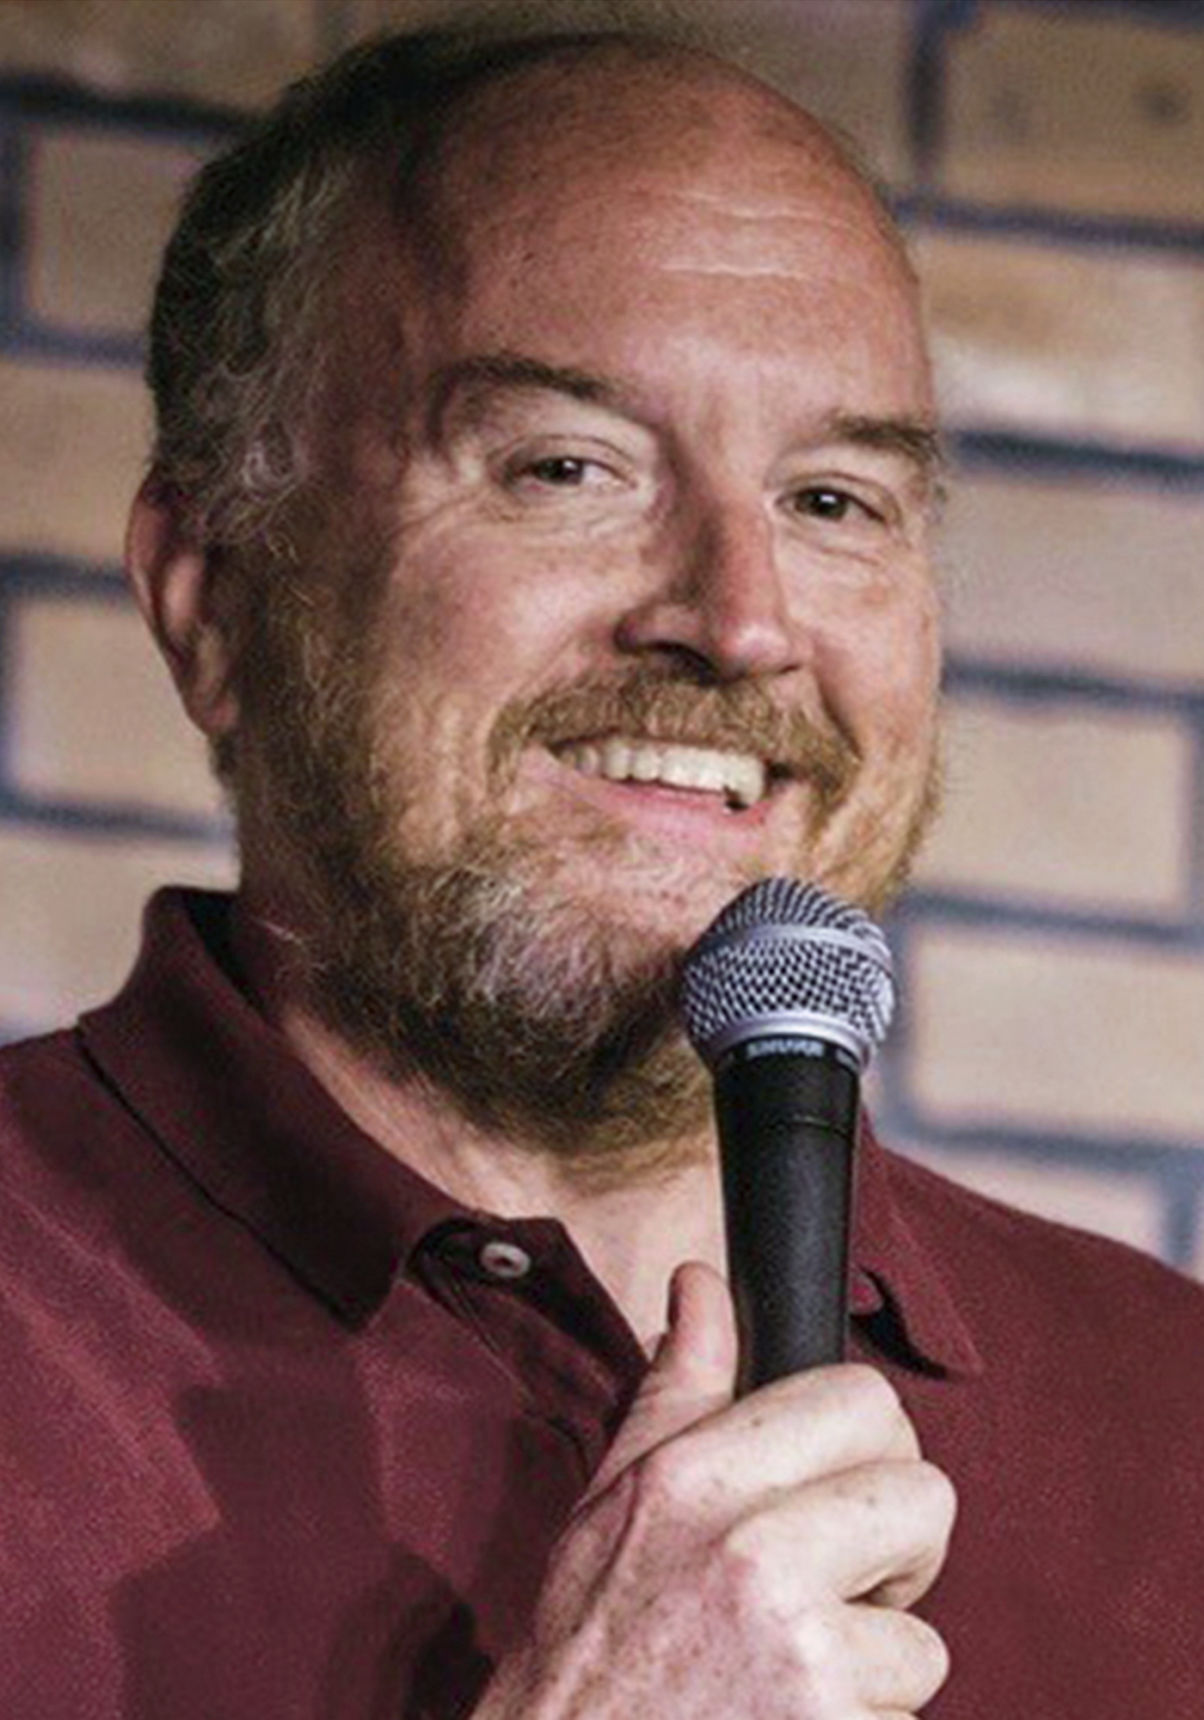 Louis C.K. - Chewed Up, Releases